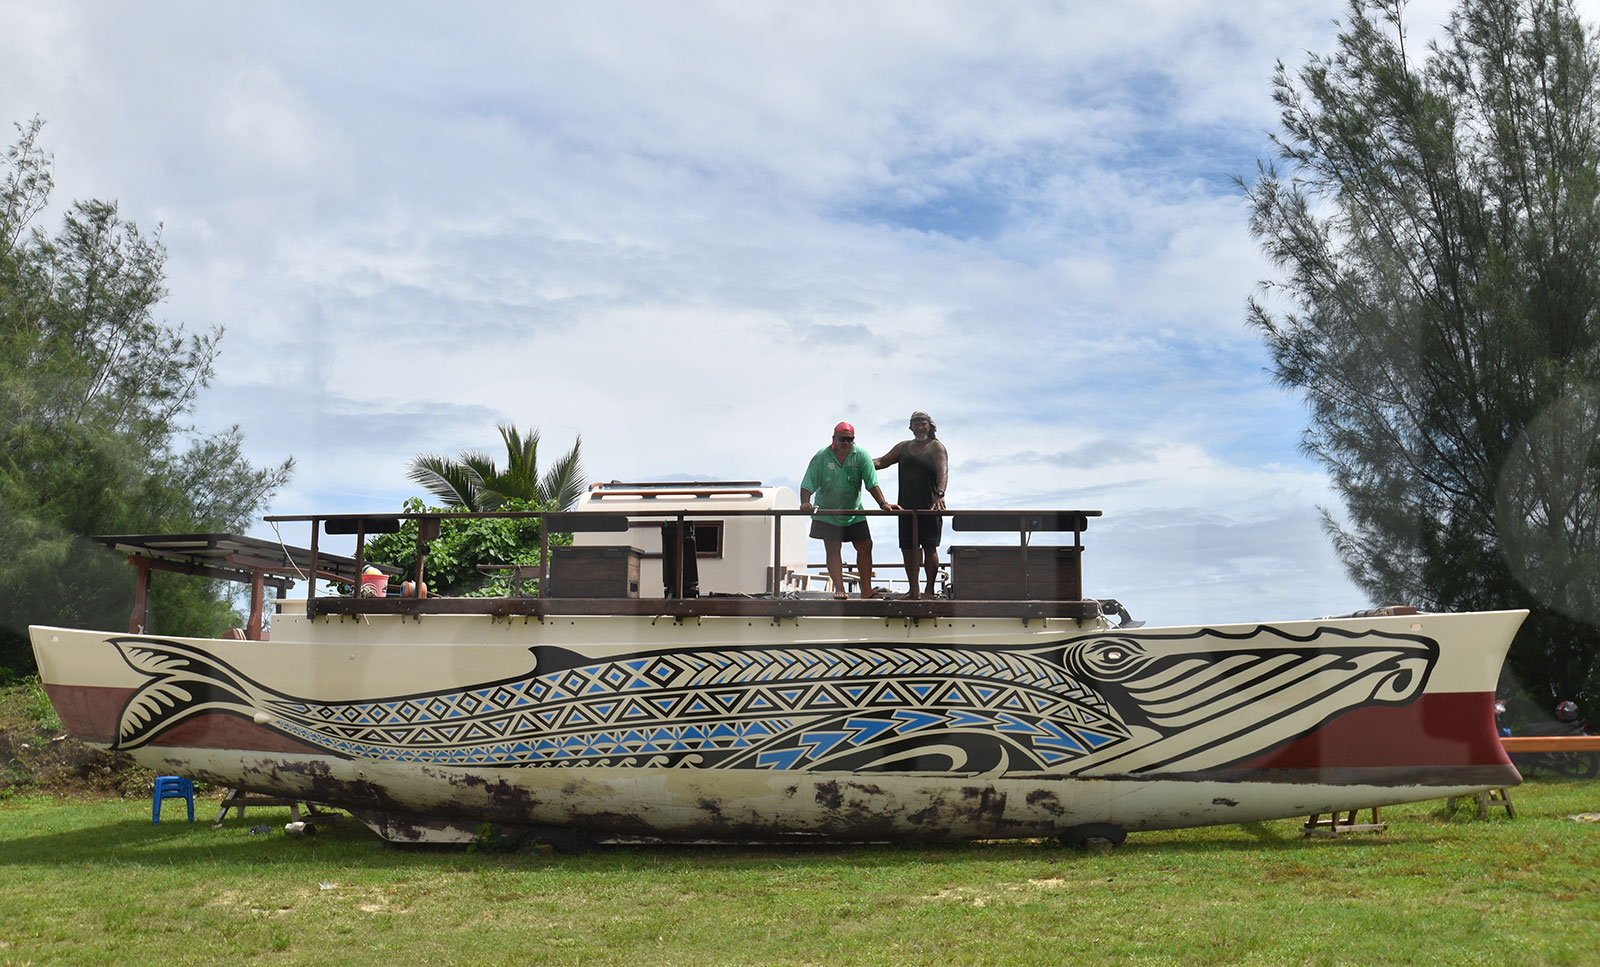 Whale artwork complete, Vaka Paikea prepares for blessing and naming ceremony